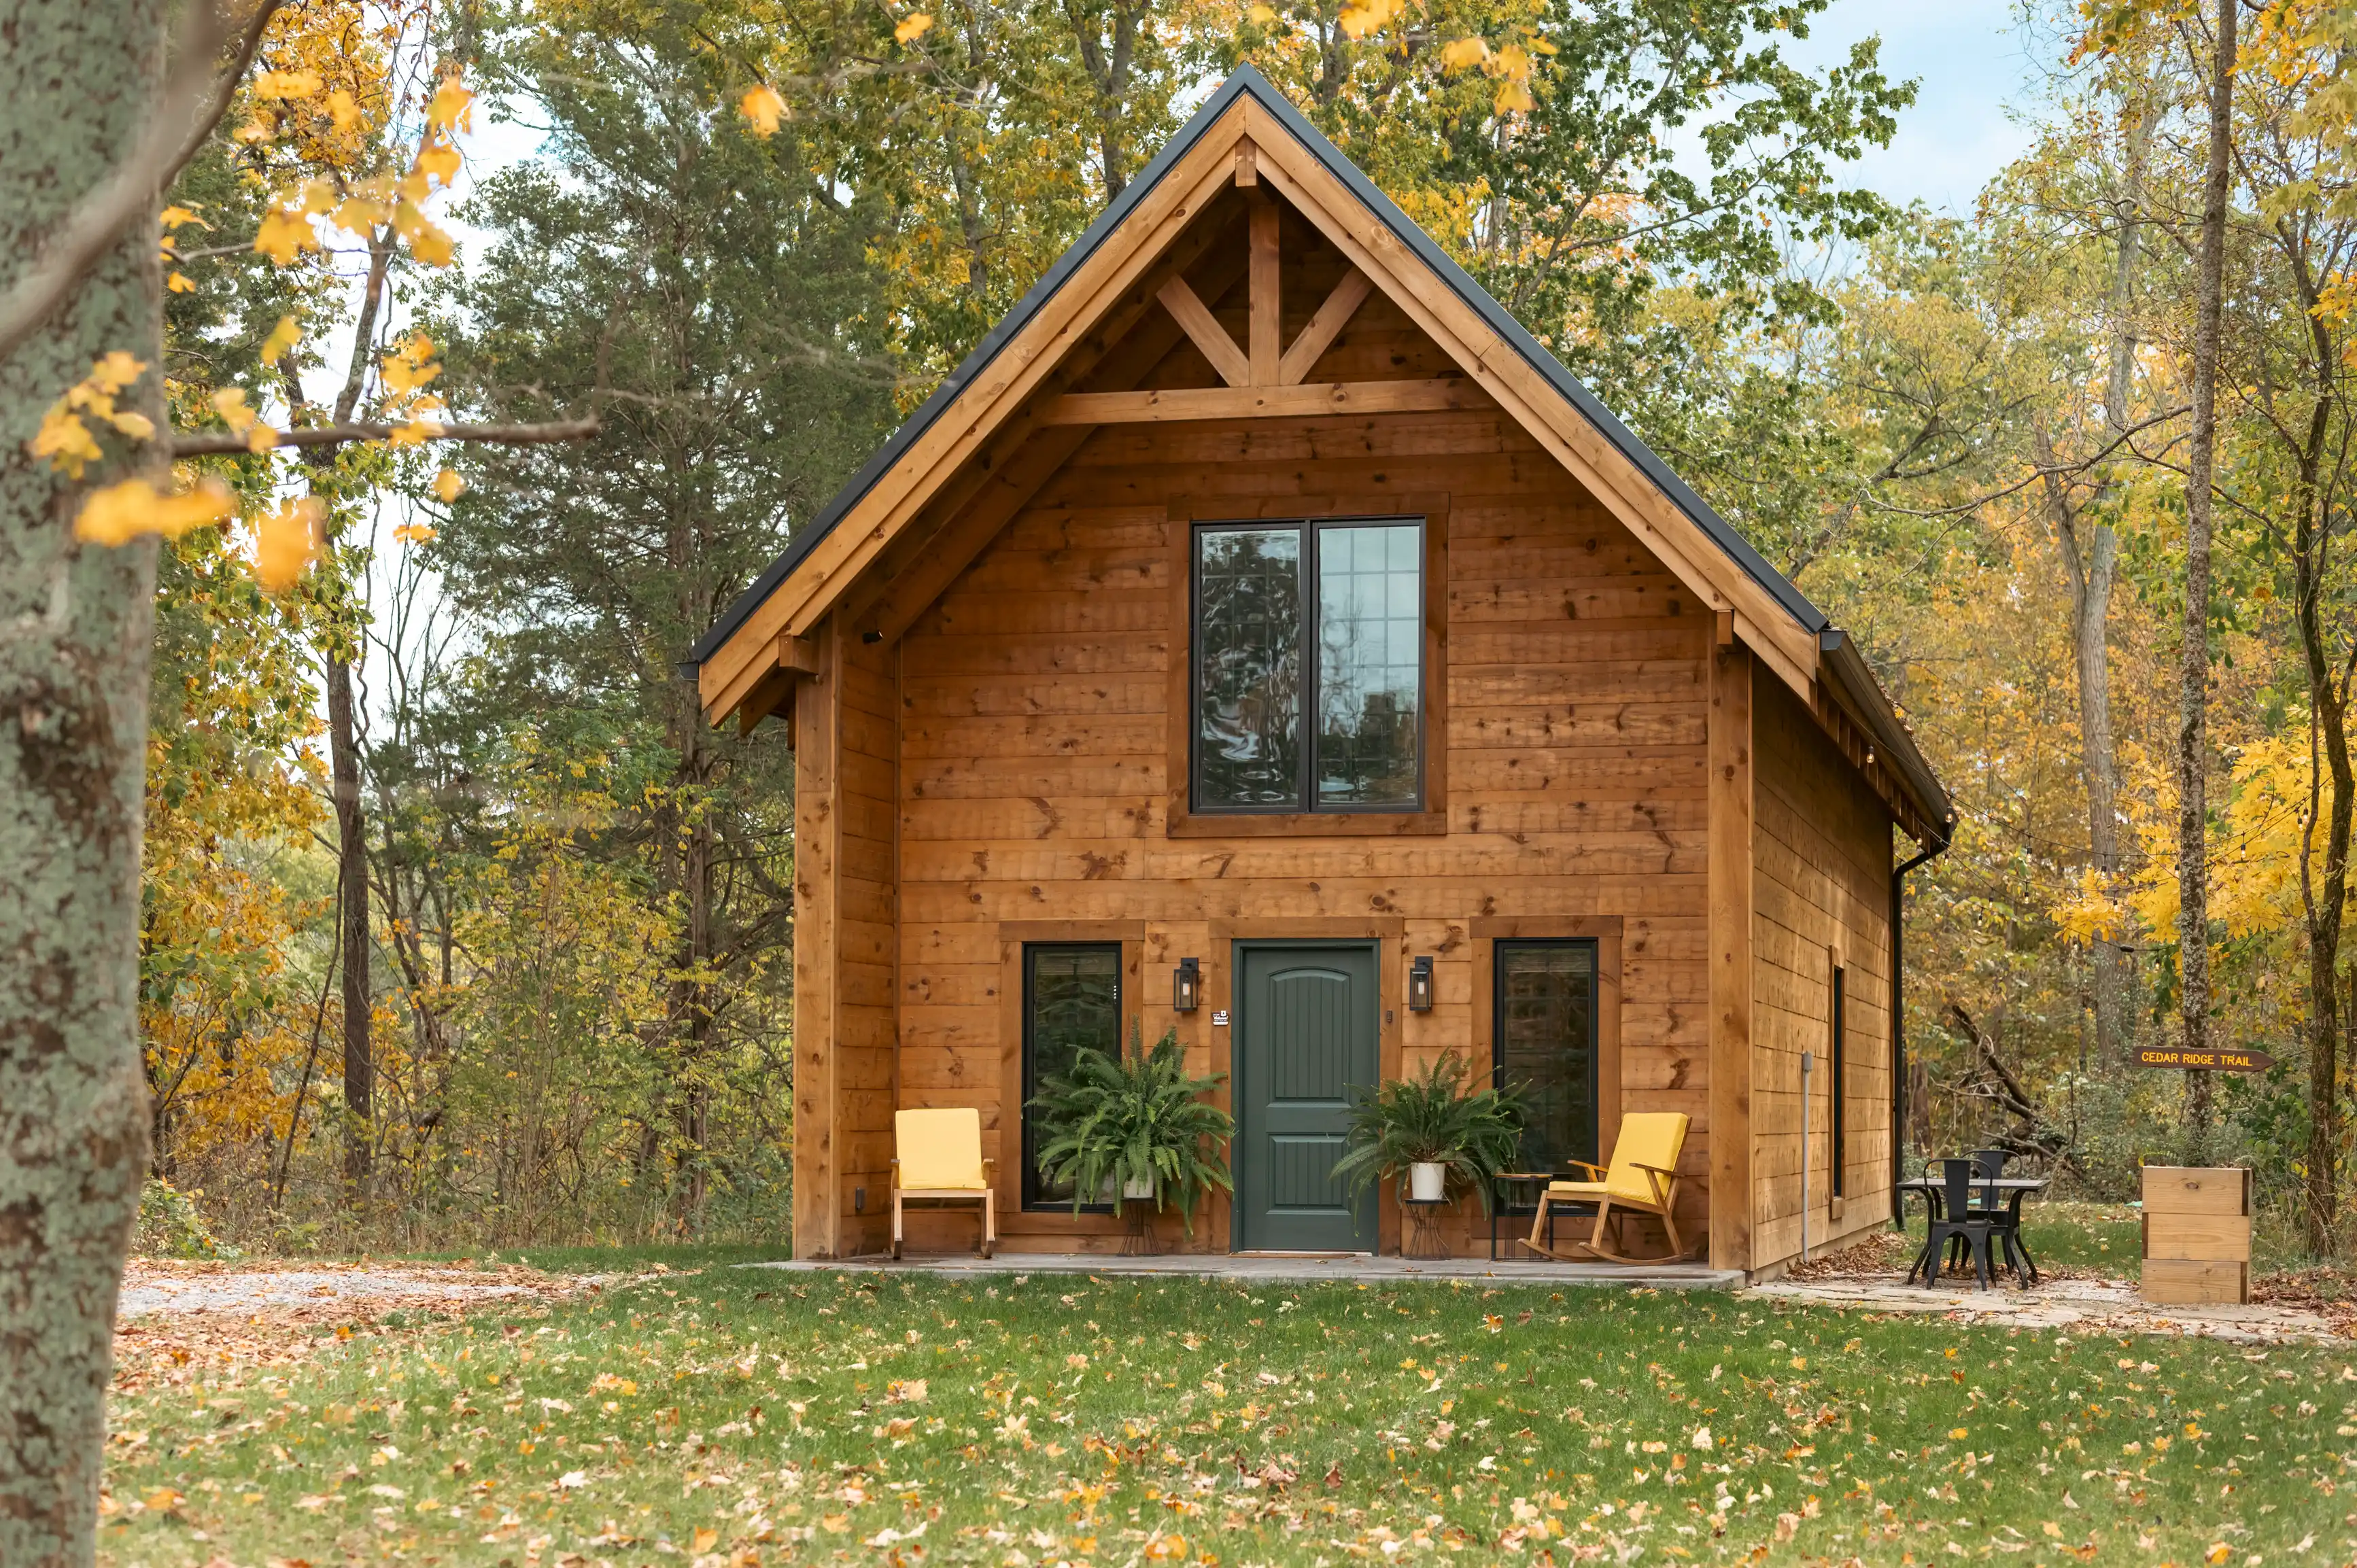 Wooden cabin with large windows surrounded by autumn foliage.